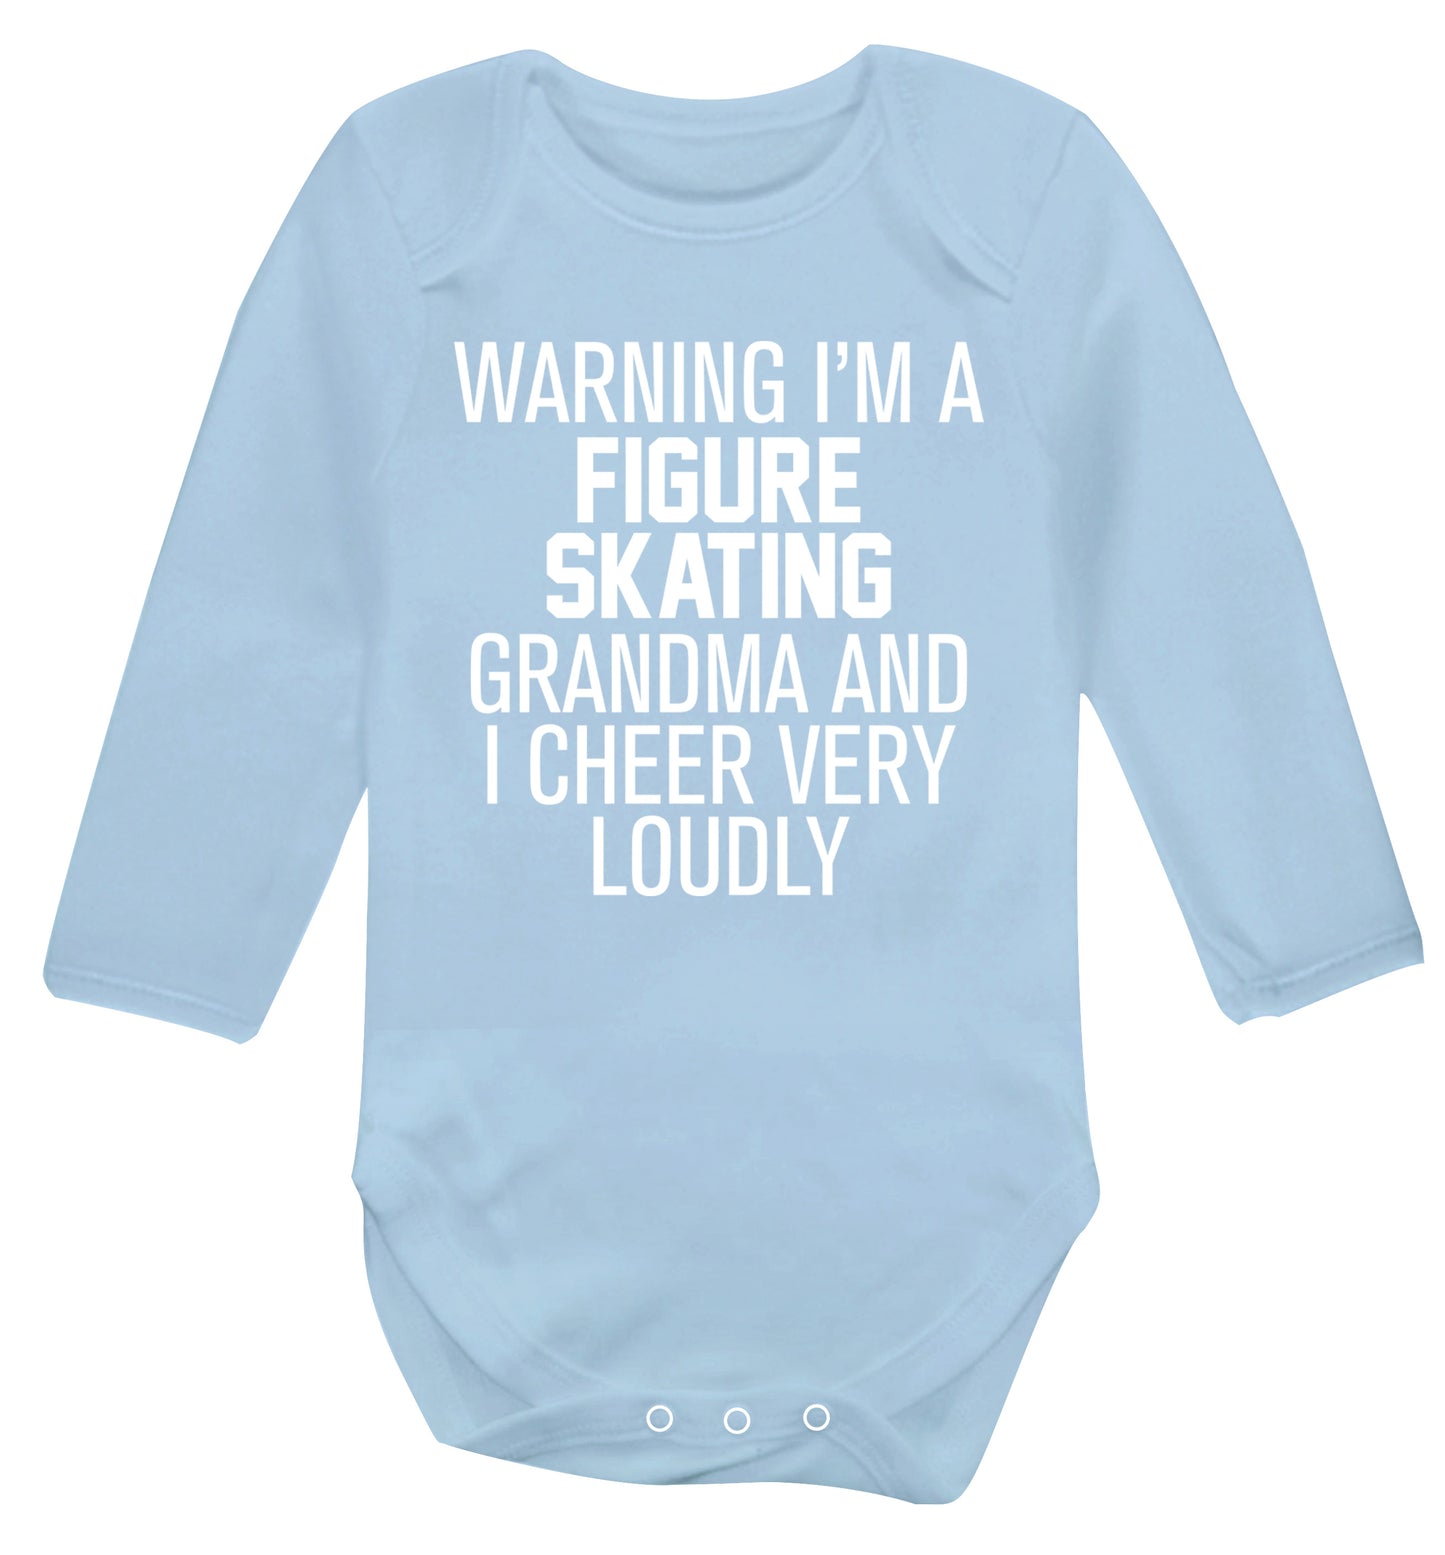 Warning I'm a figure skating grandma and I cheer very loudly Baby Vest long sleeved pale blue 6-12 months